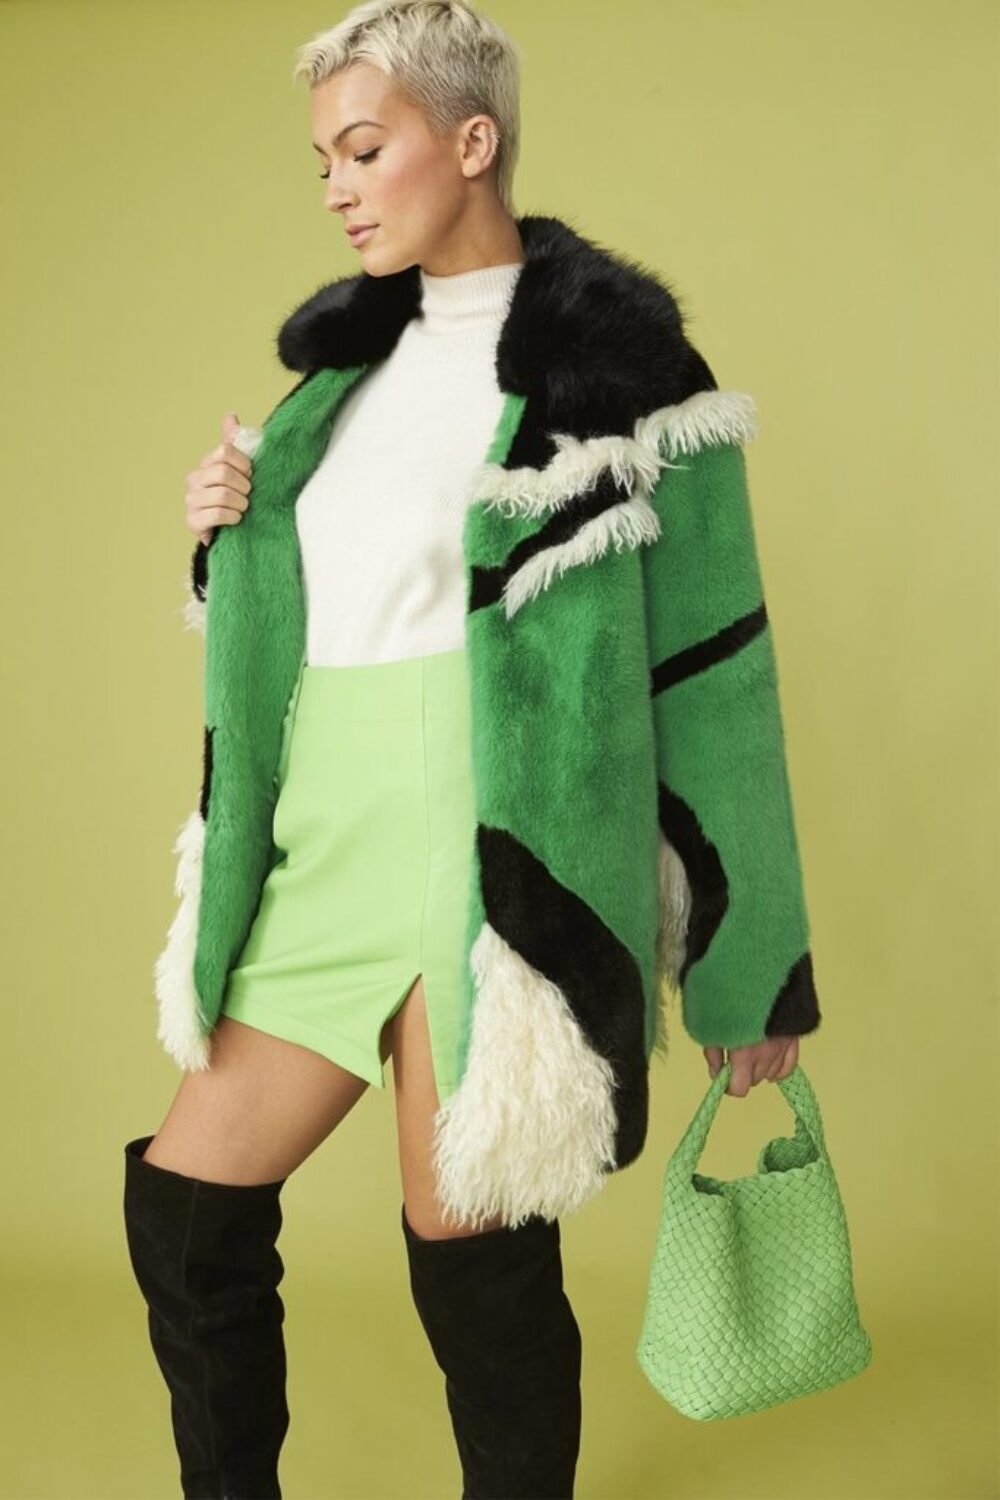 Shop Lux Hand Made Green Mixed Mongolian and Faux Fur Coat and women's luxury and designer clothes at www.lux-apparel.co.uk